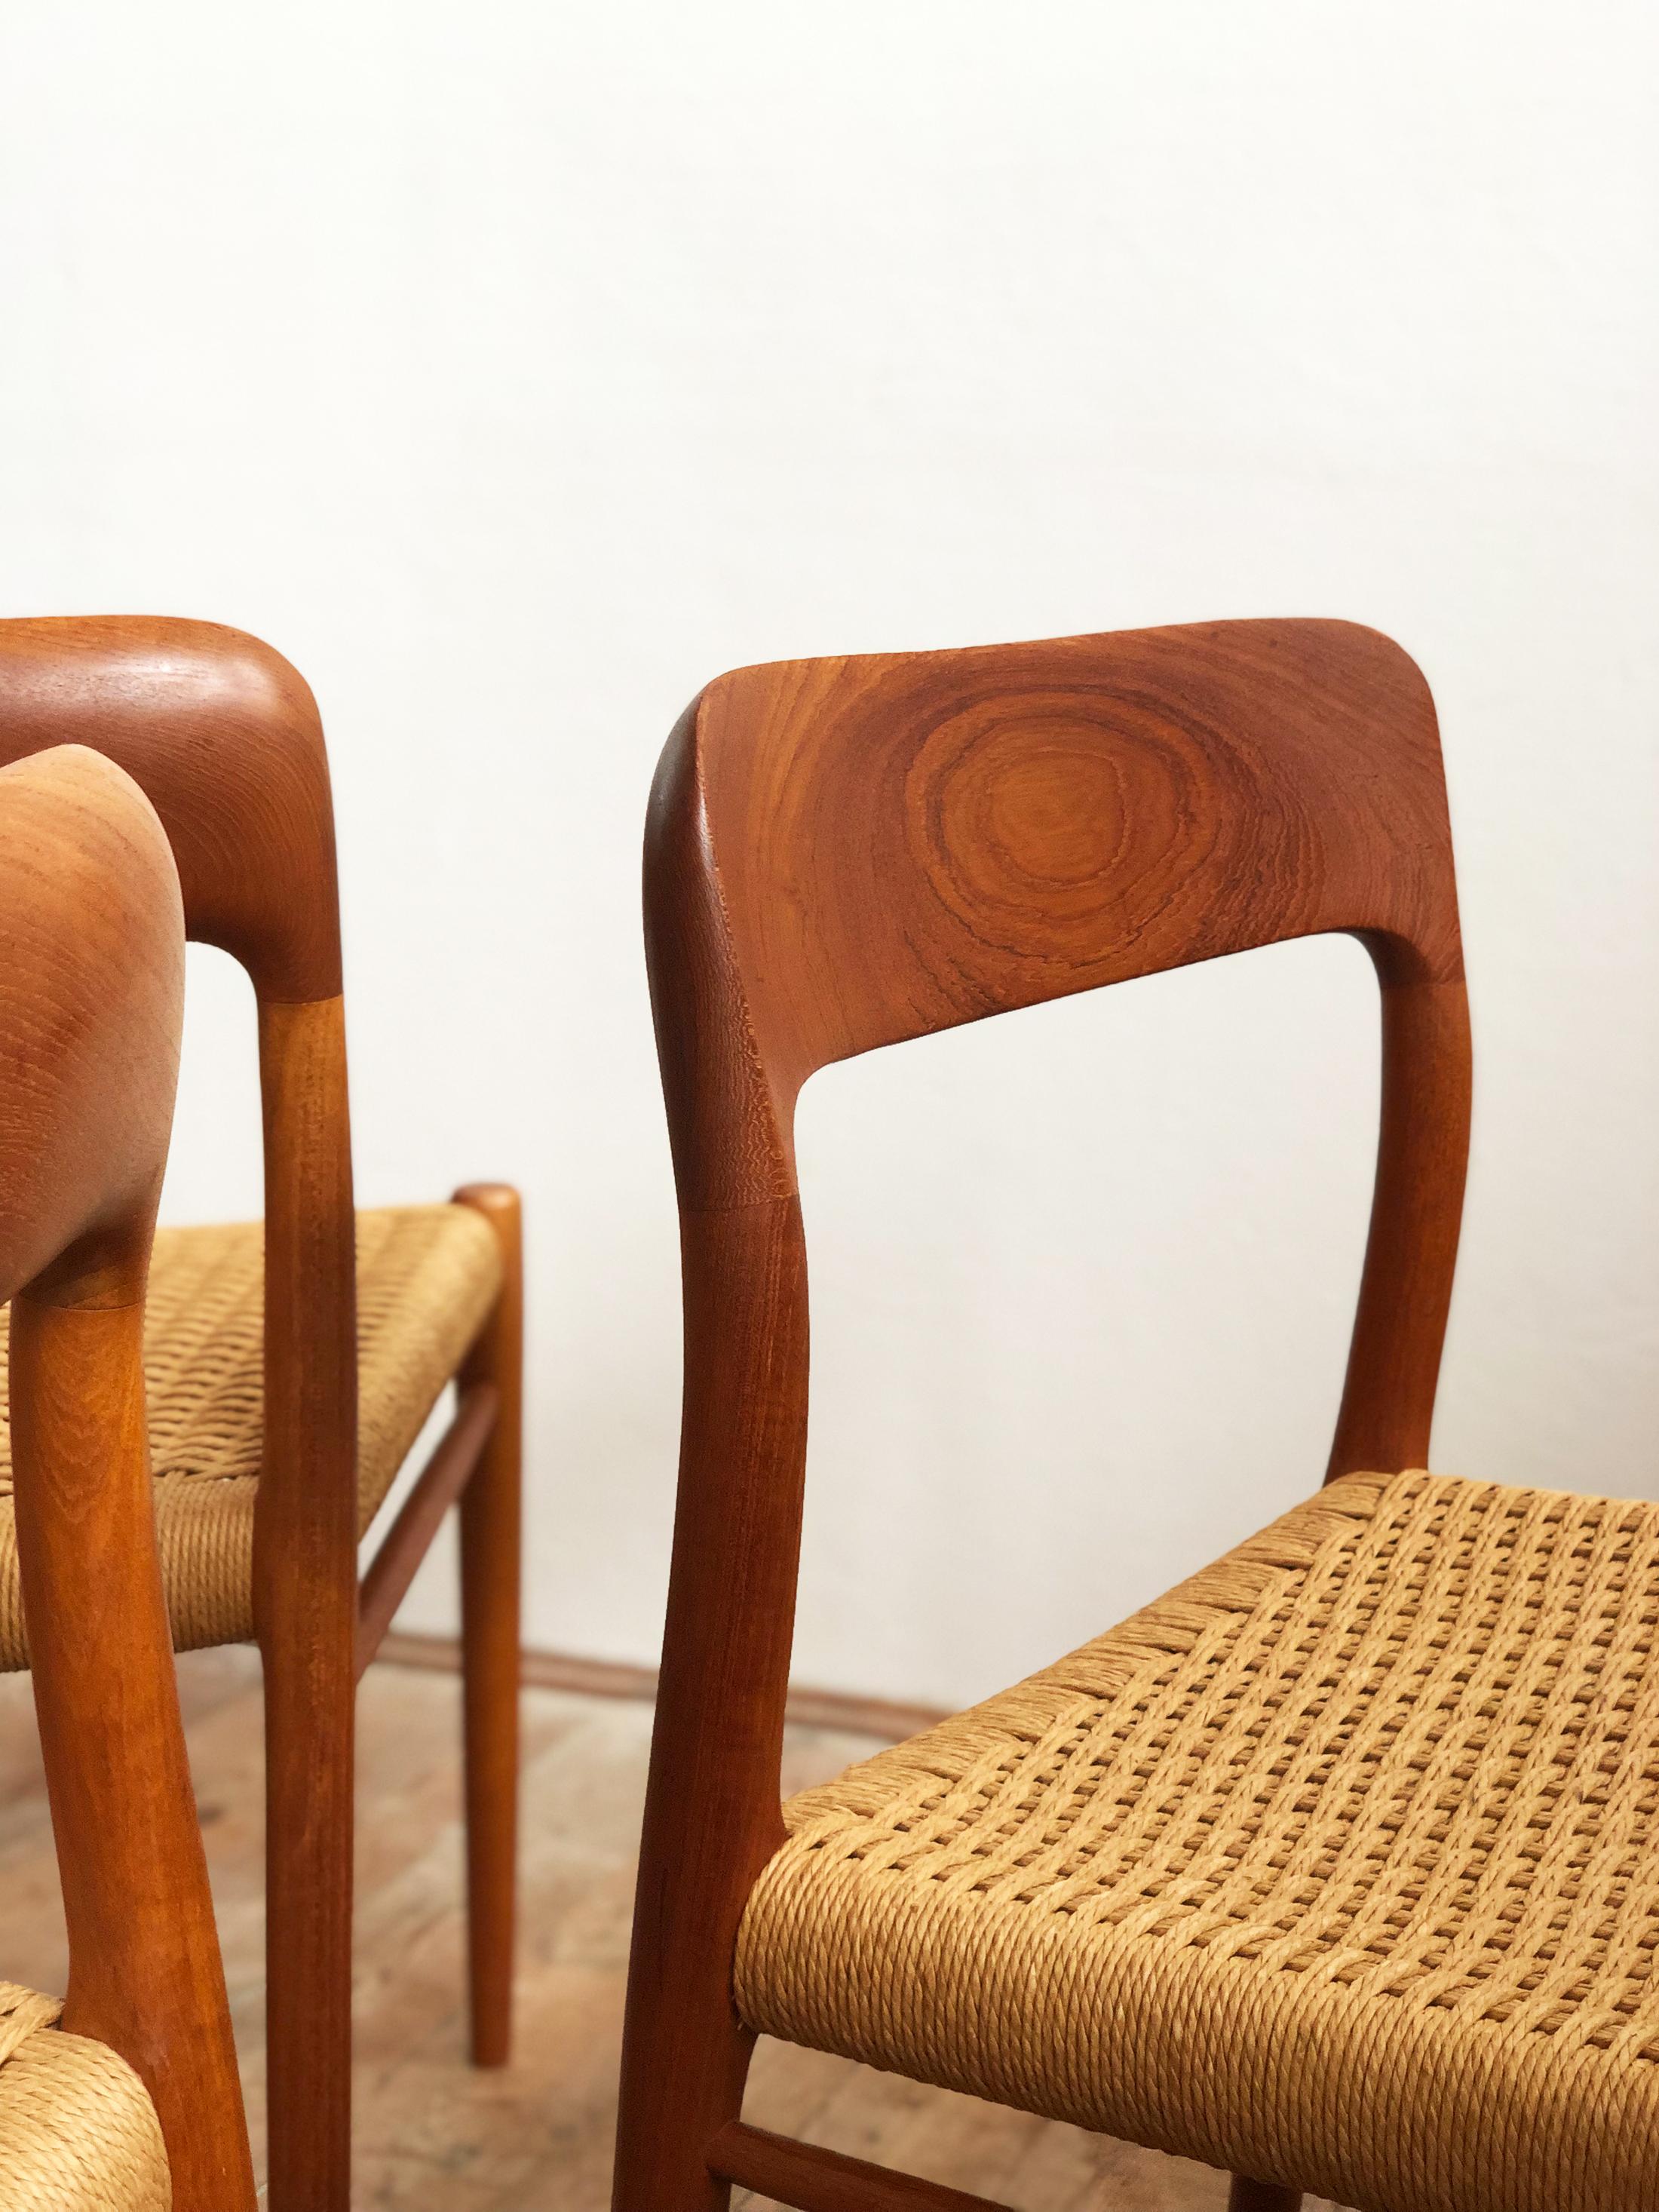 Papercord Dining Chairs, Model 75 by Niels O. Møller in Teak and Paper Cord, Set of 4 For Sale